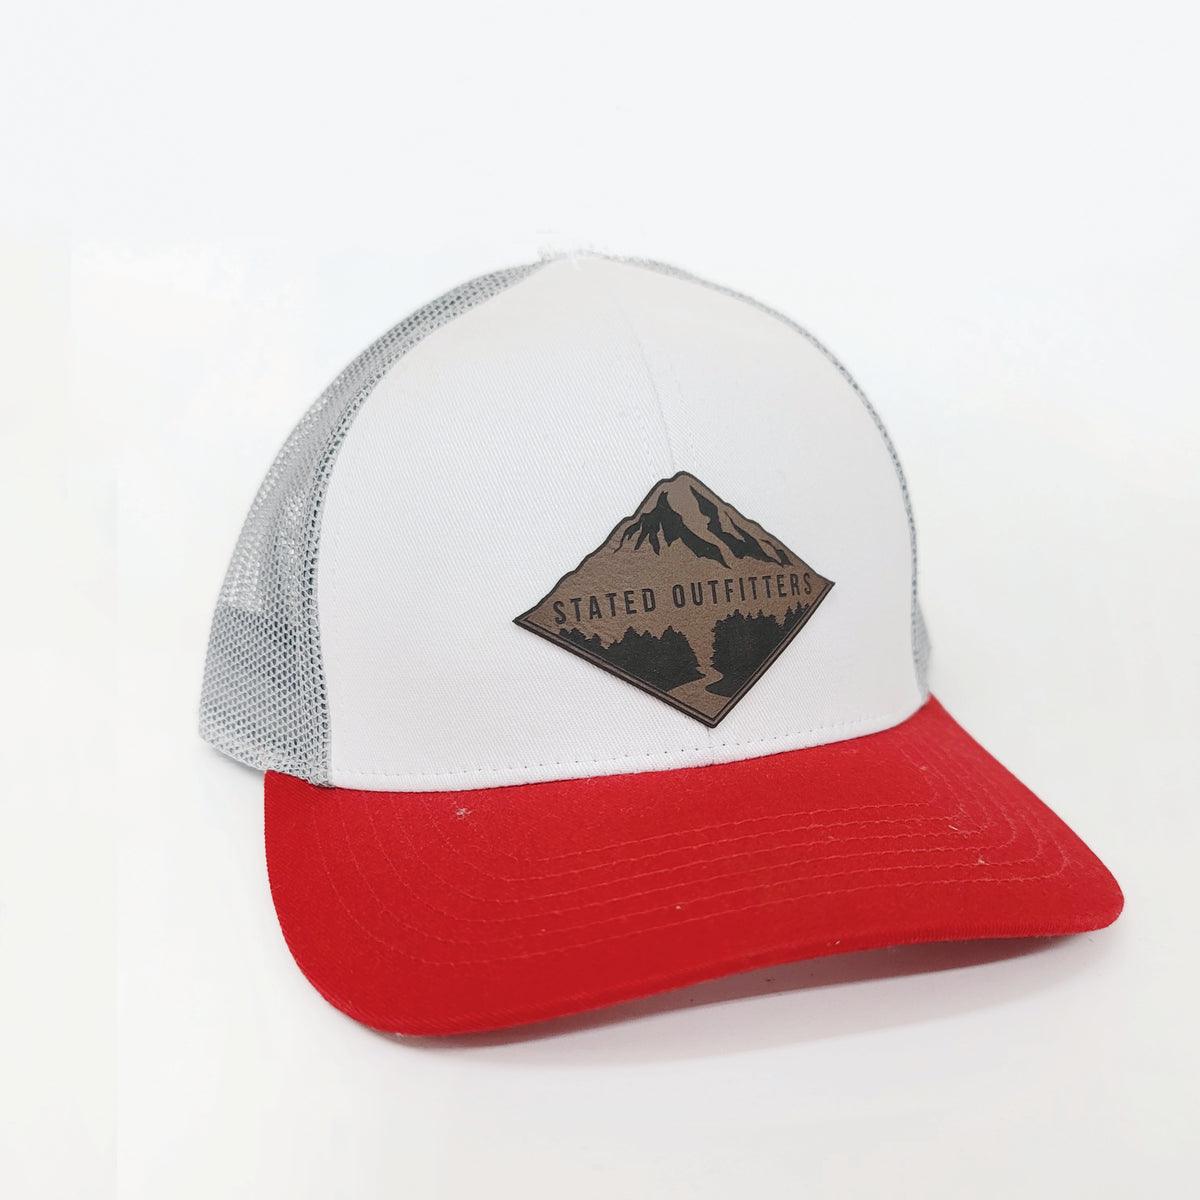 Stated Outfitters Patch Tri-Color Hat